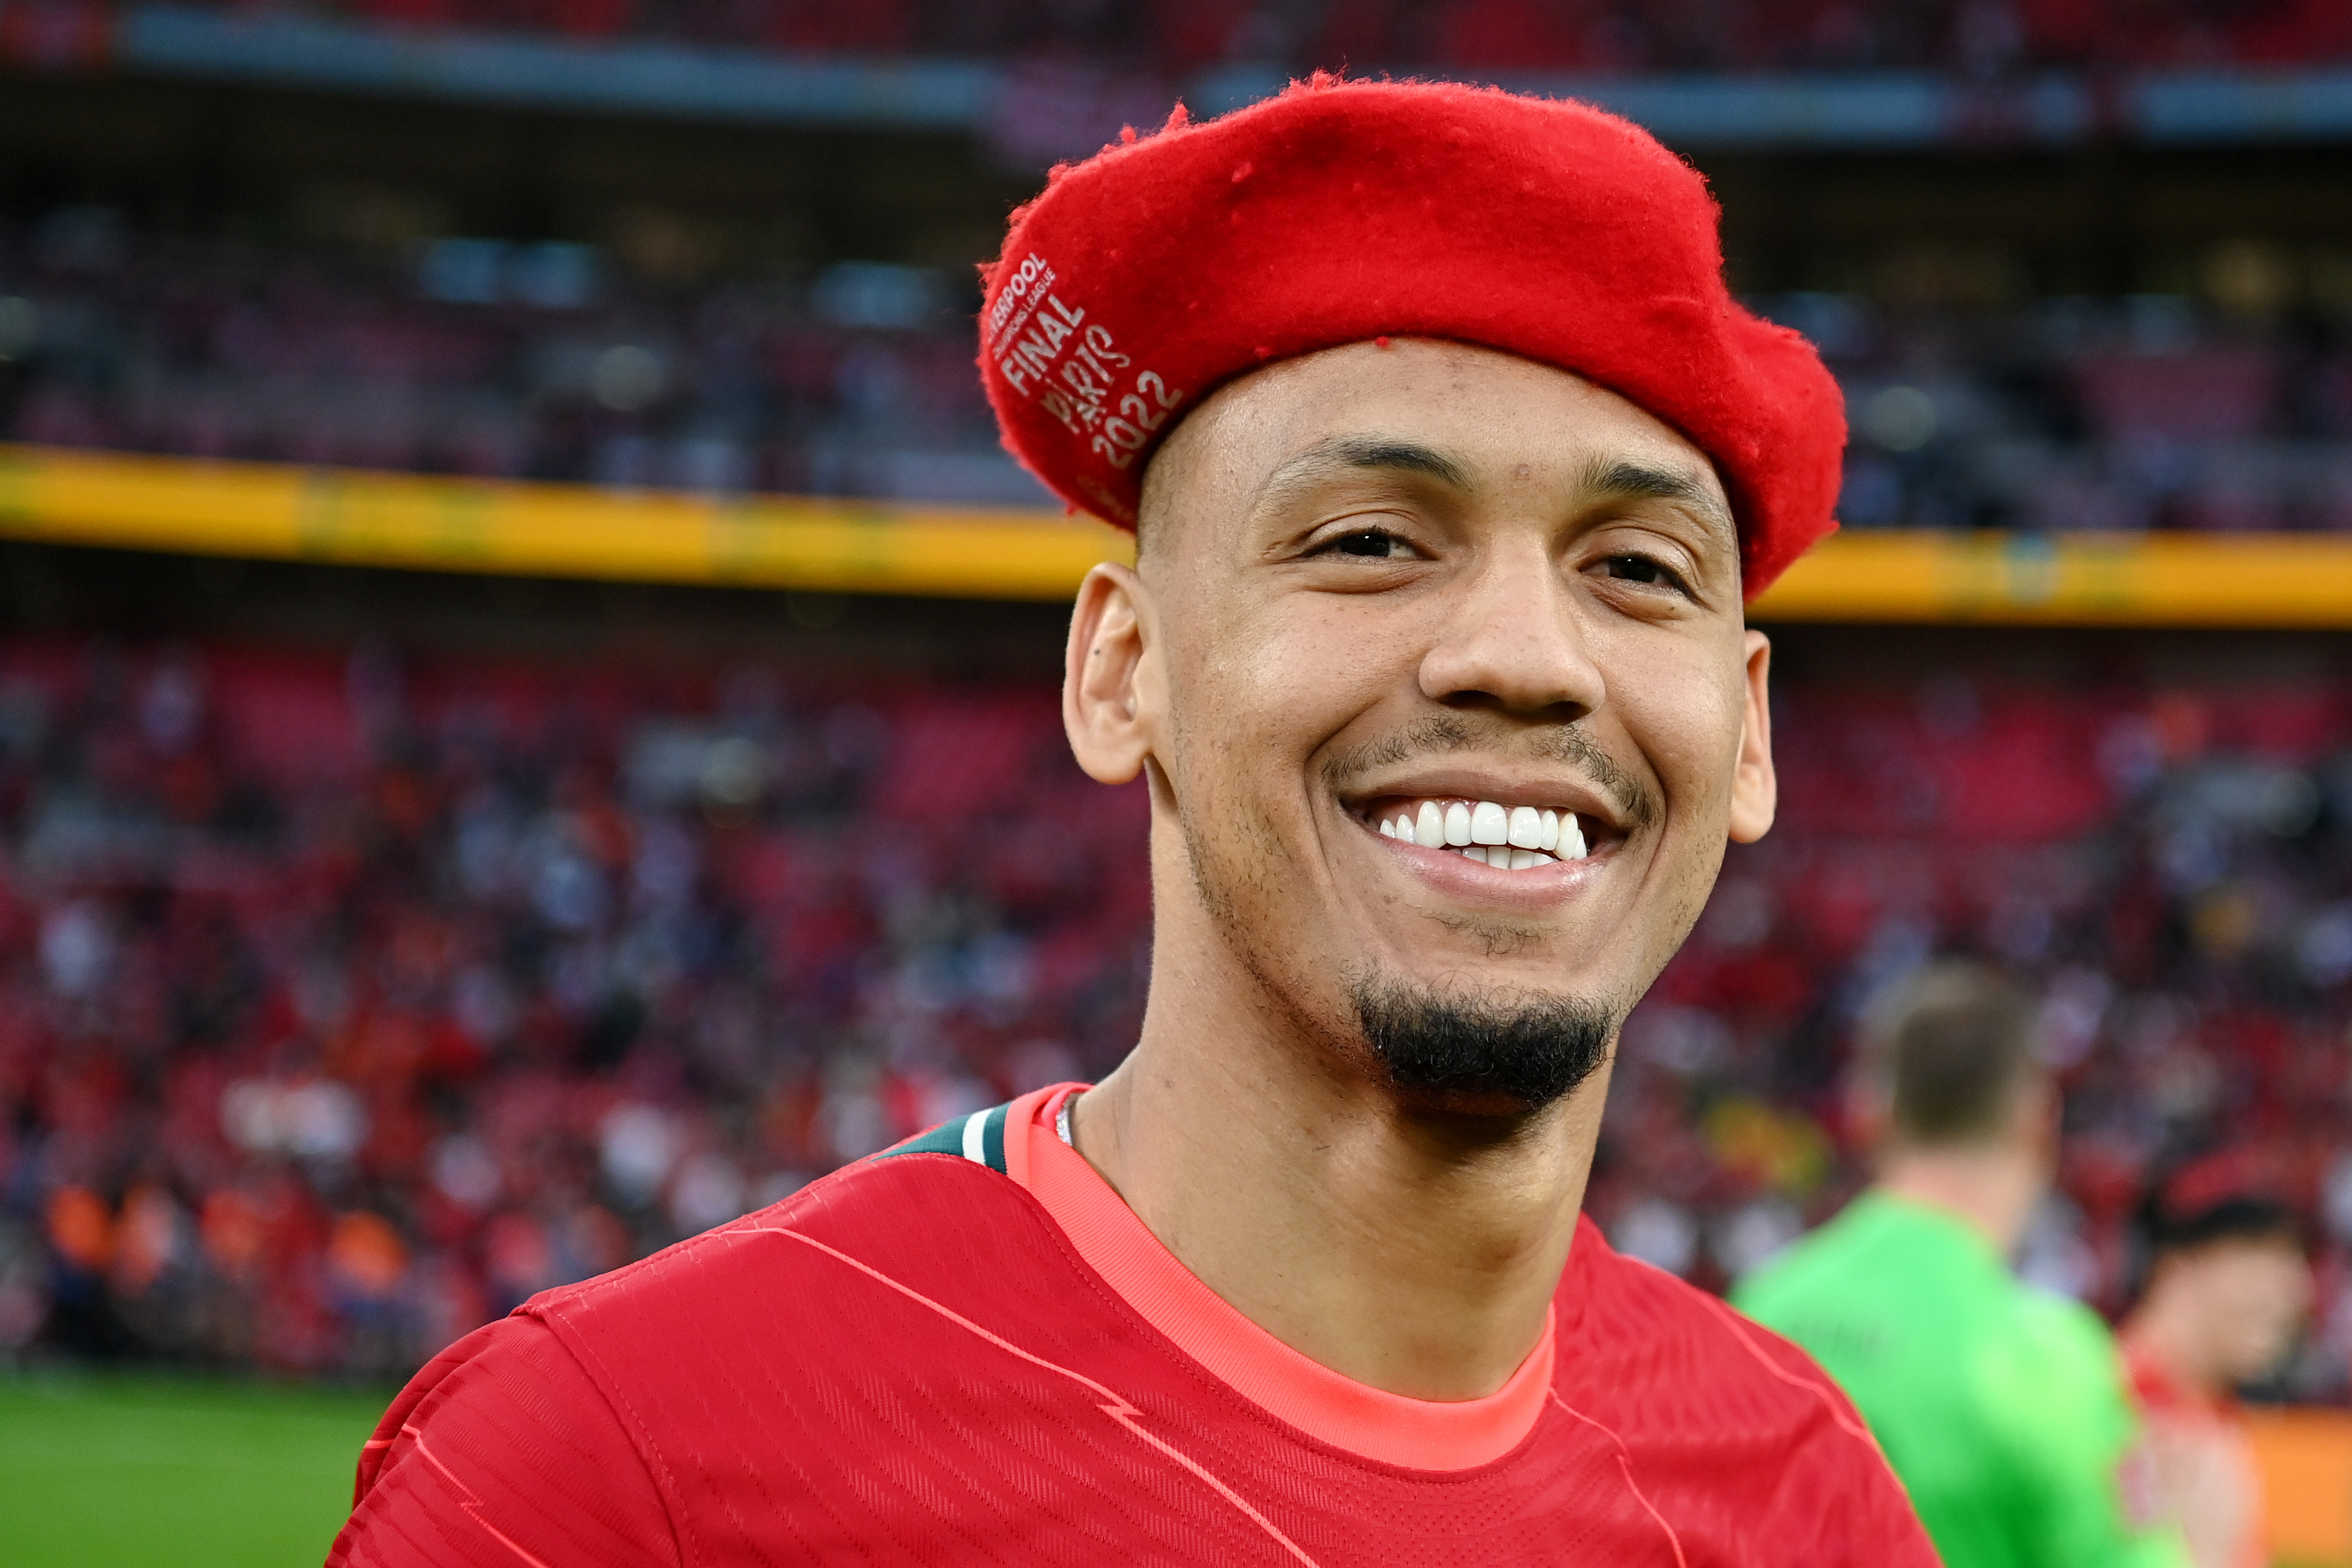 Fabinho of Liverpool celebrates (while wearing a beret) following their team’s victory in the penalty shoot out during The FA Cup Final match between Chelsea and Liverpool at Wembley Stadium on May 14, 2022 in London, England.